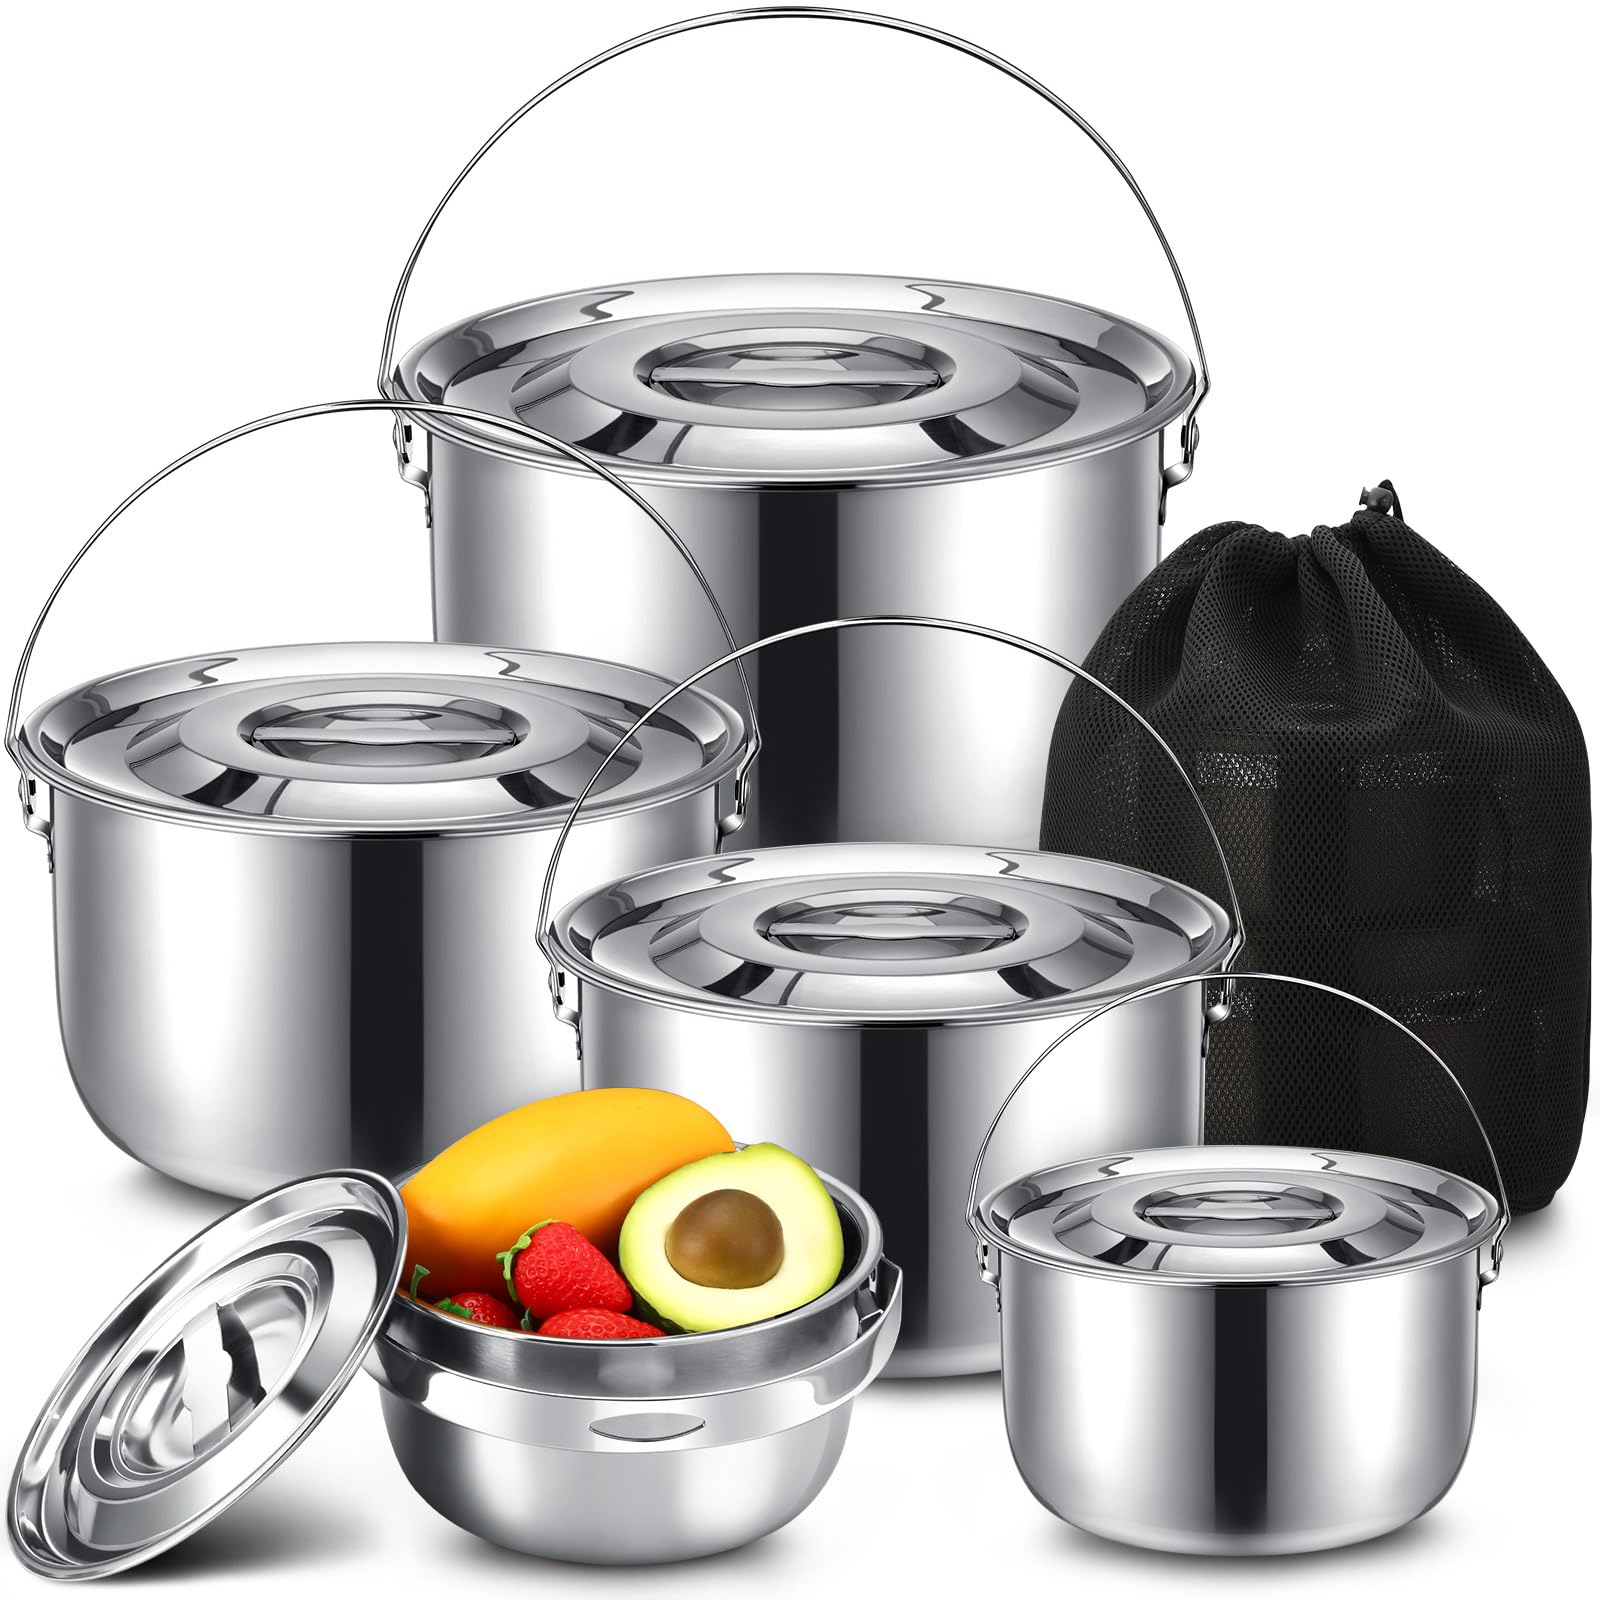 Nuogo 4 Piece Camping Cookware Set 304 Stainless Steel Campfire Pots Compact Pots Set Open Fire Nesting Camping Pots Portable